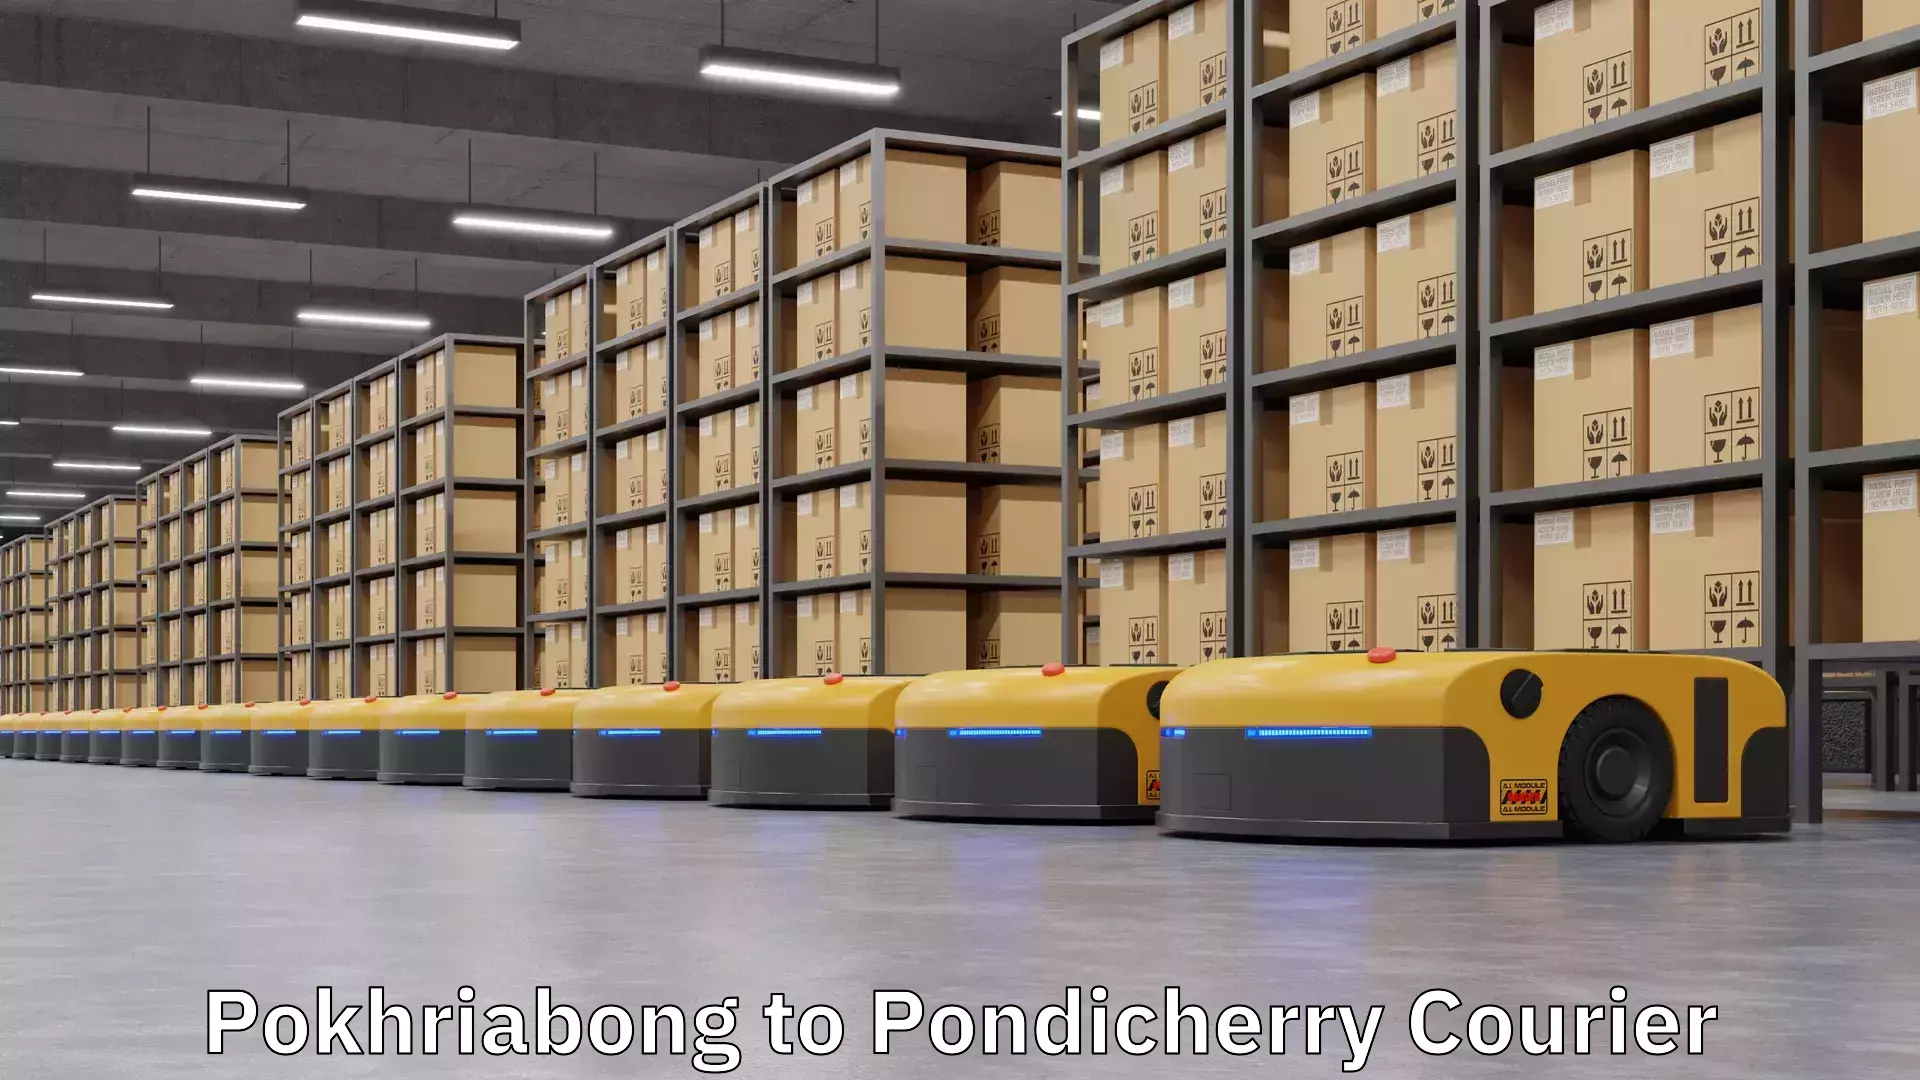 Express delivery capabilities Pokhriabong to Pondicherry